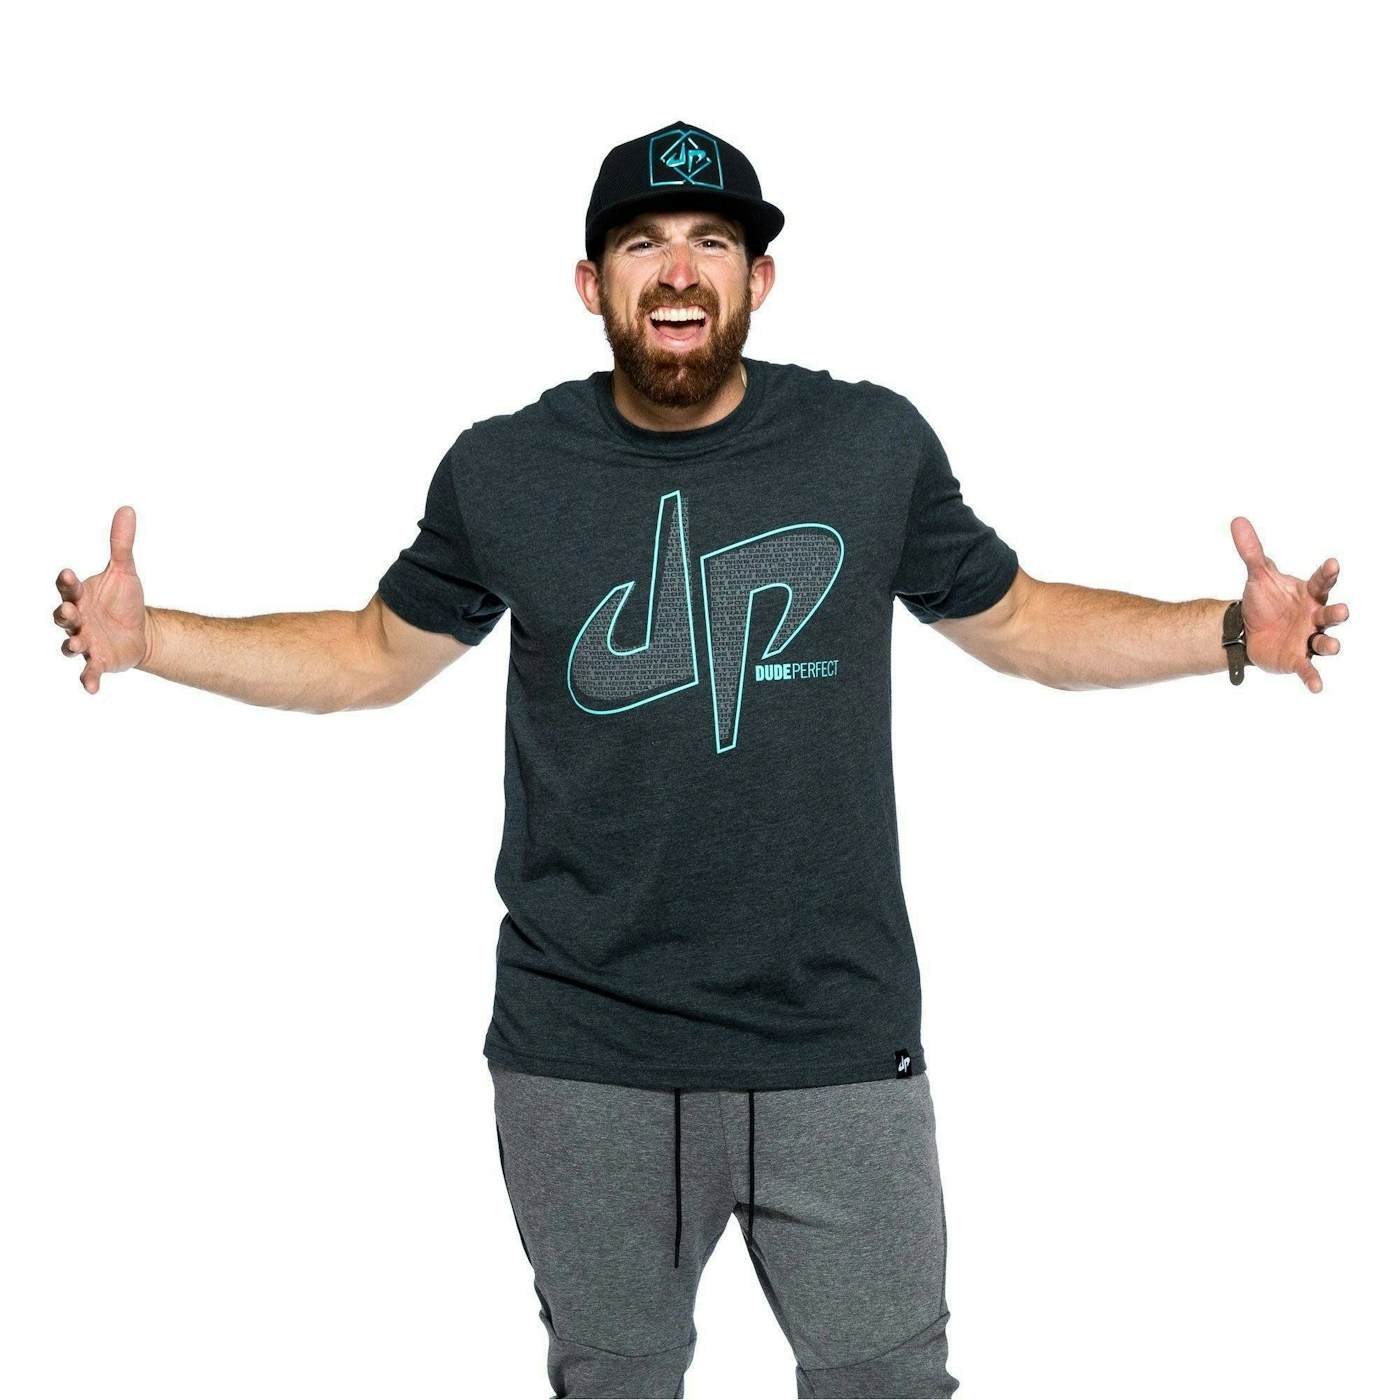 Dude Perfect Pound It Reflective Tee